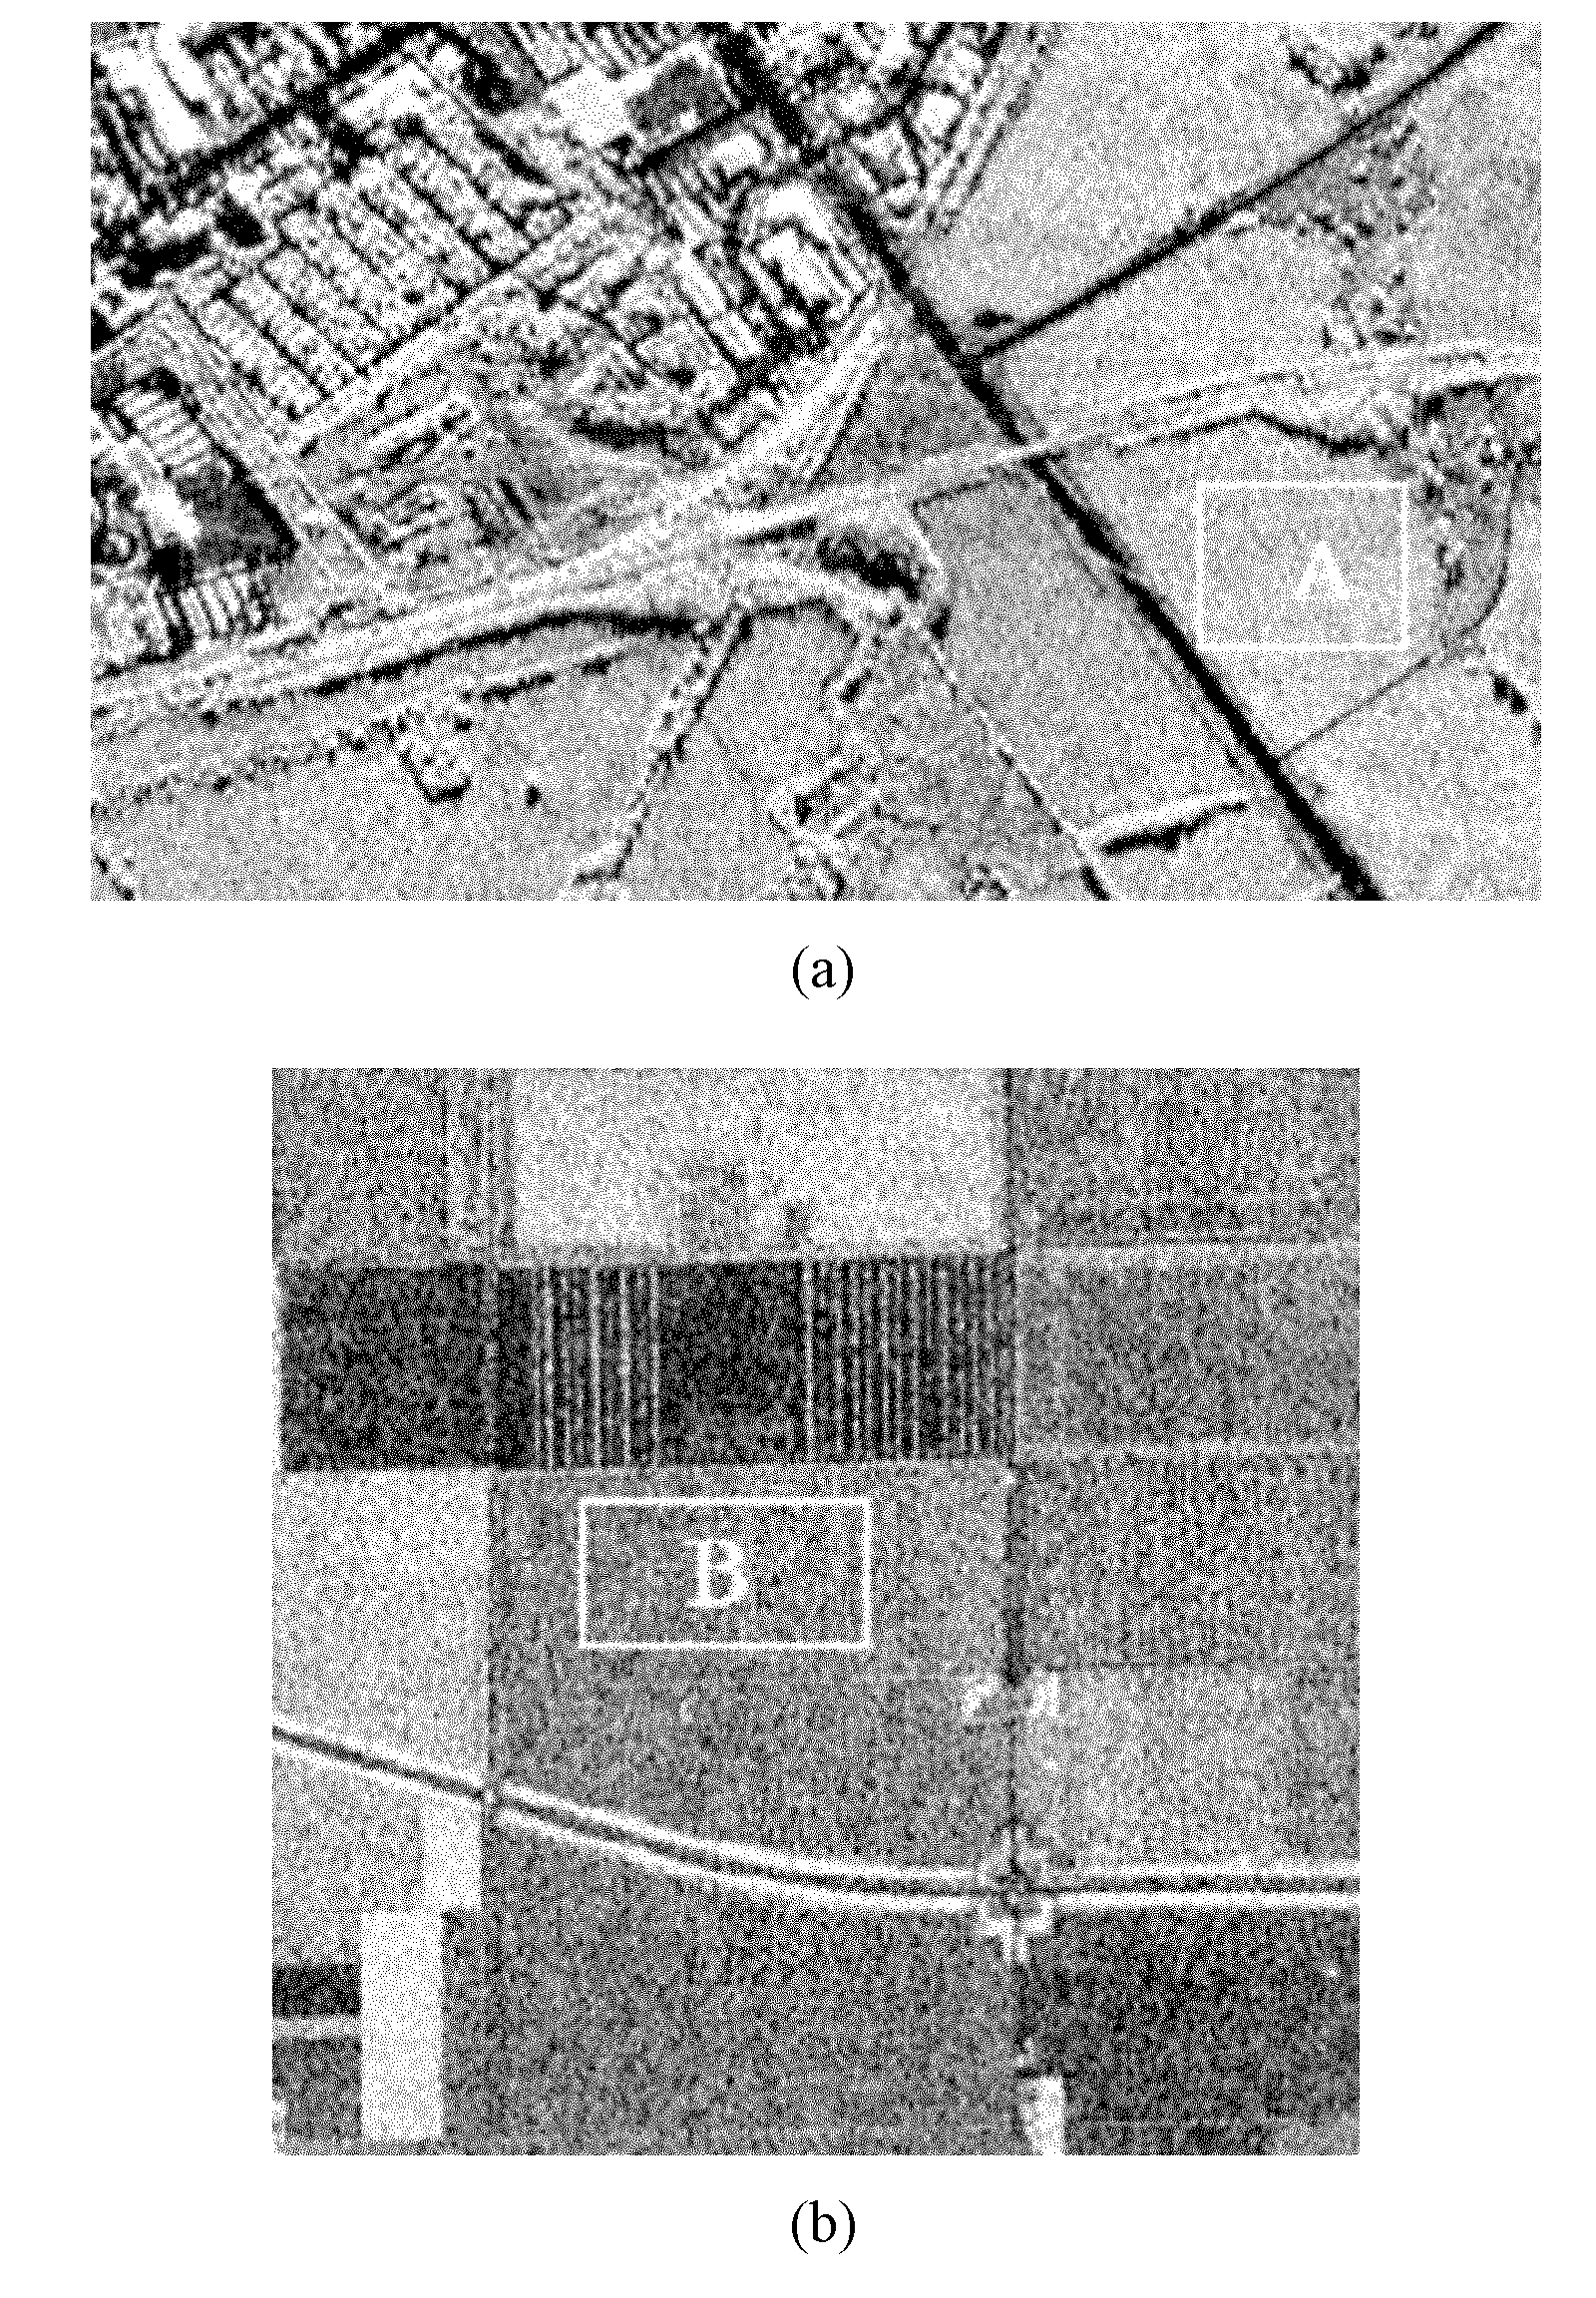 Speckle suppression method for polarized SAR (Synthetic Aperture Radar) data based on non-local mean value fused with PCA (Polar Cap Absorption)